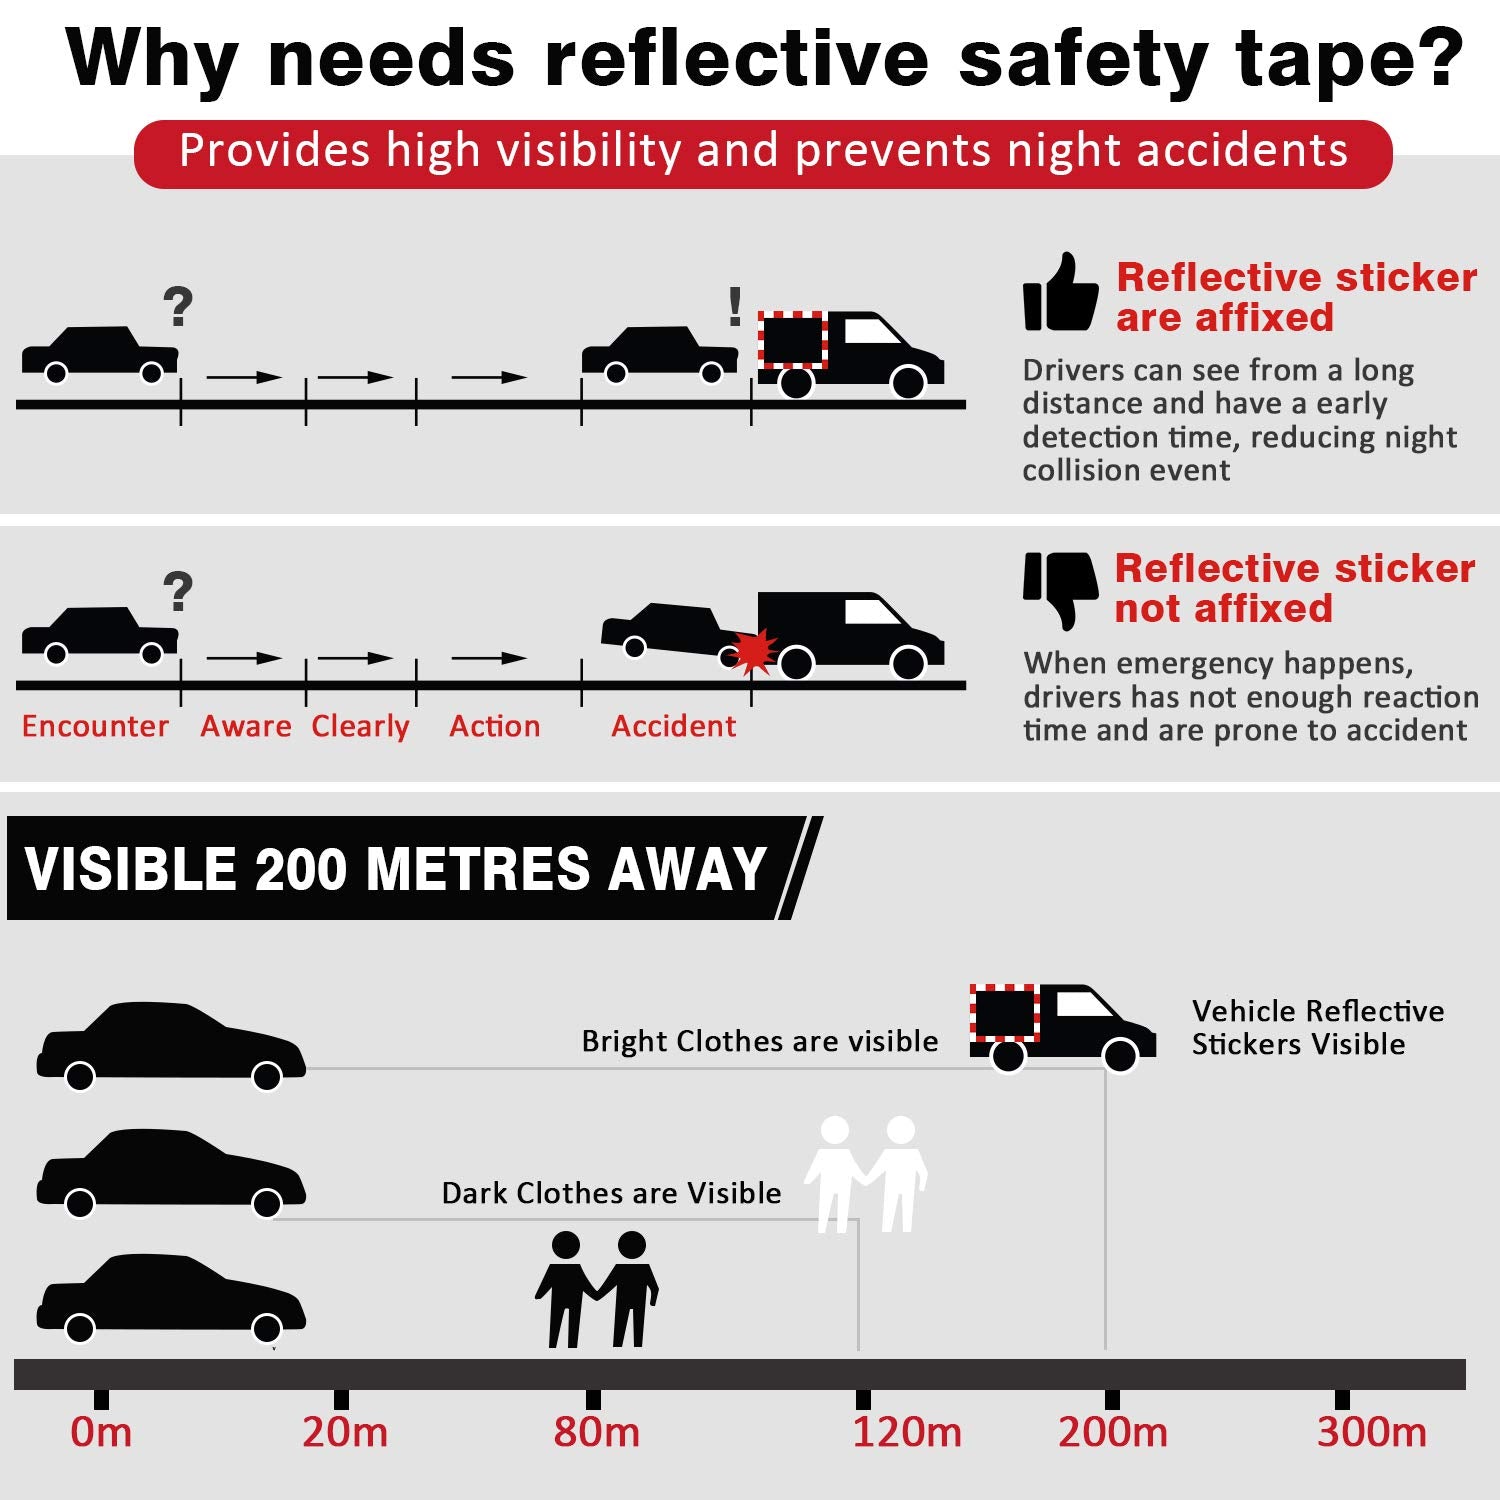 Why needs reflective safety tape?